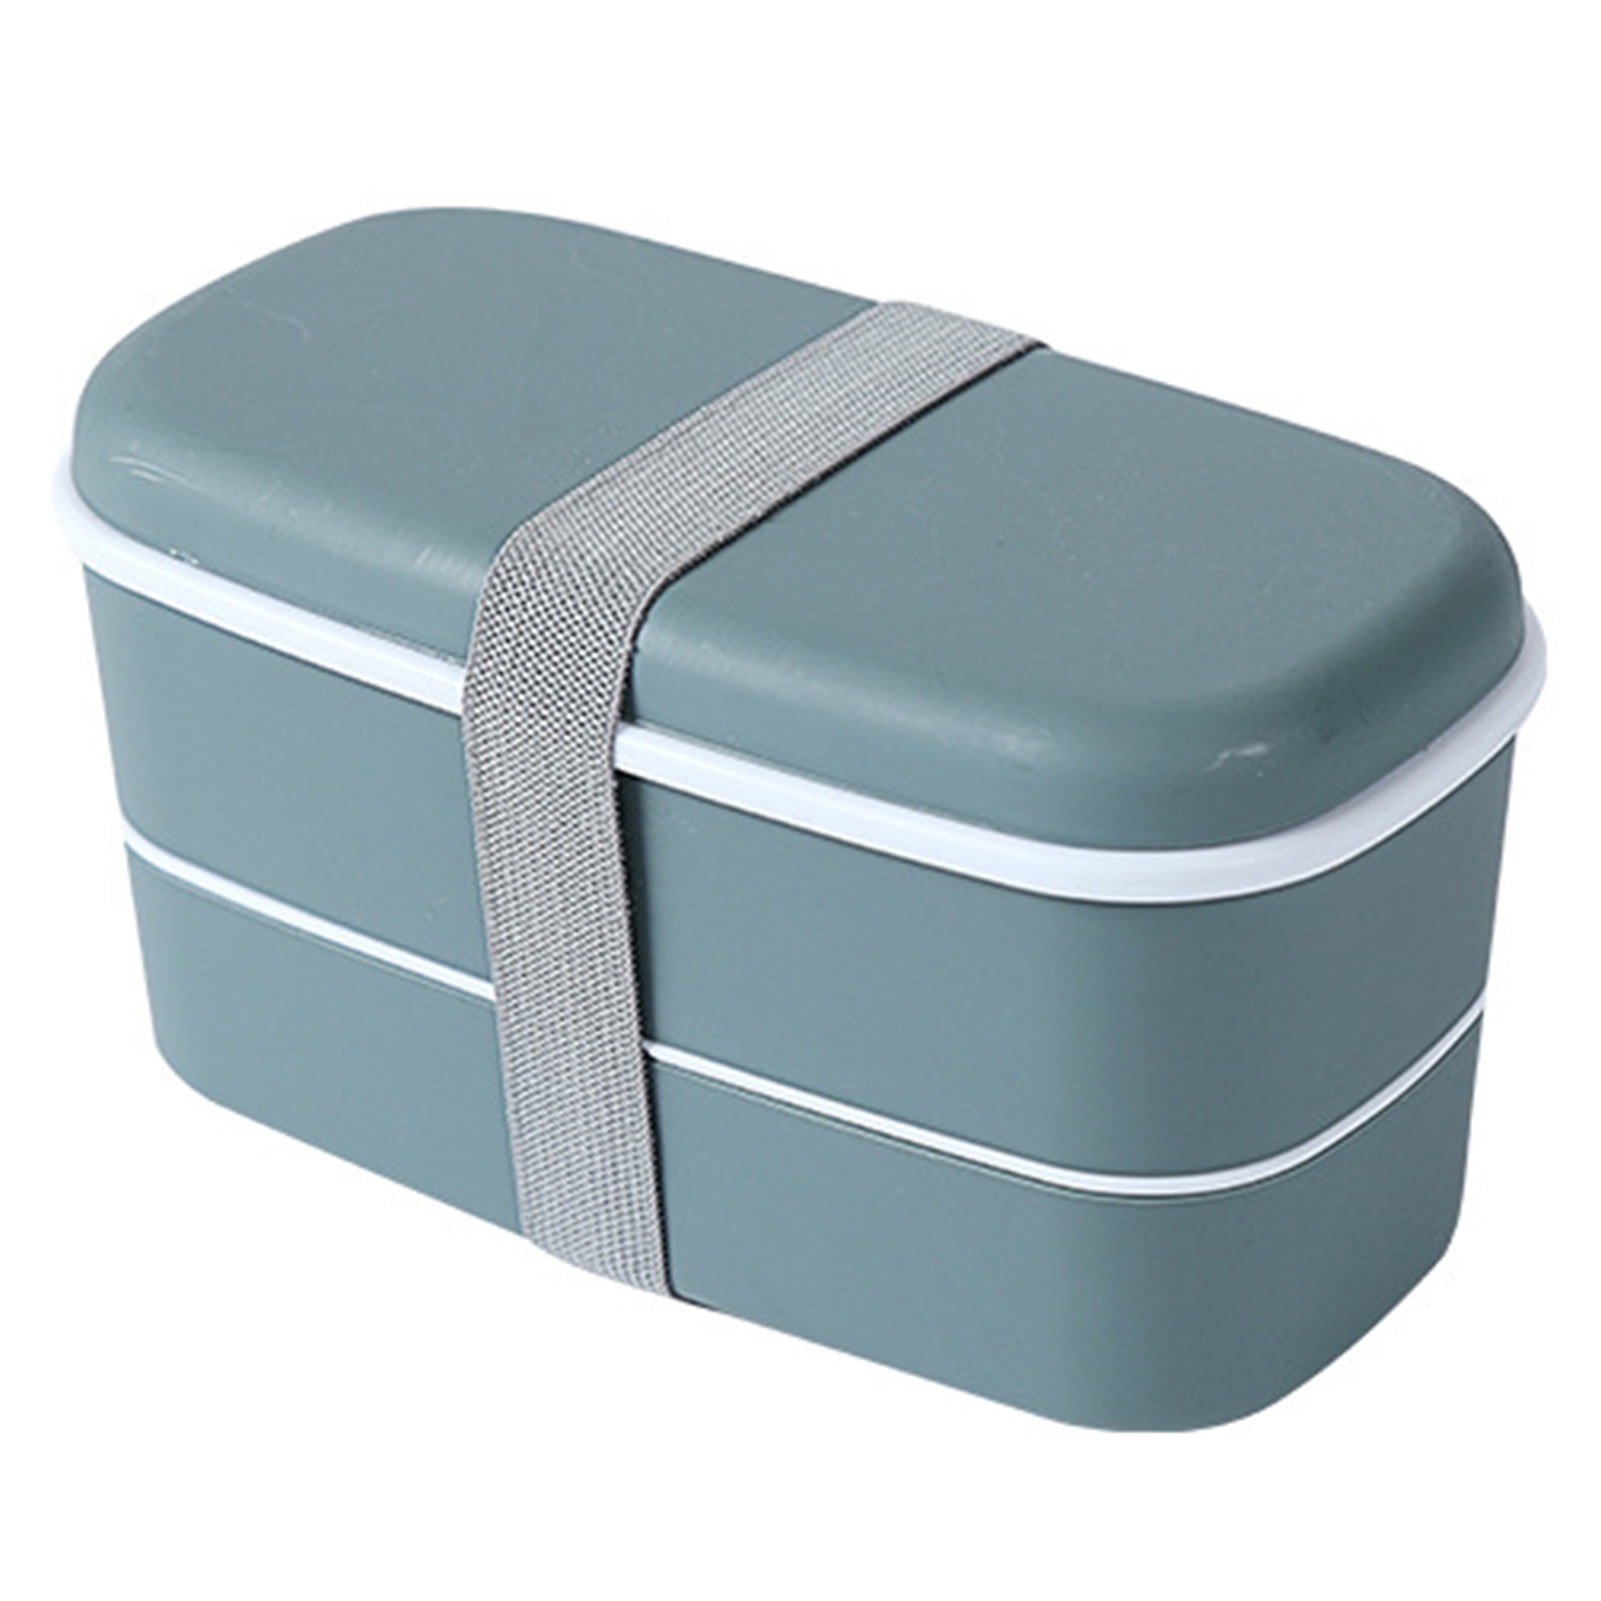 Yirtree Bento Box Adult Lunch Box with Spoon, 1/2/3-Tier Stainless